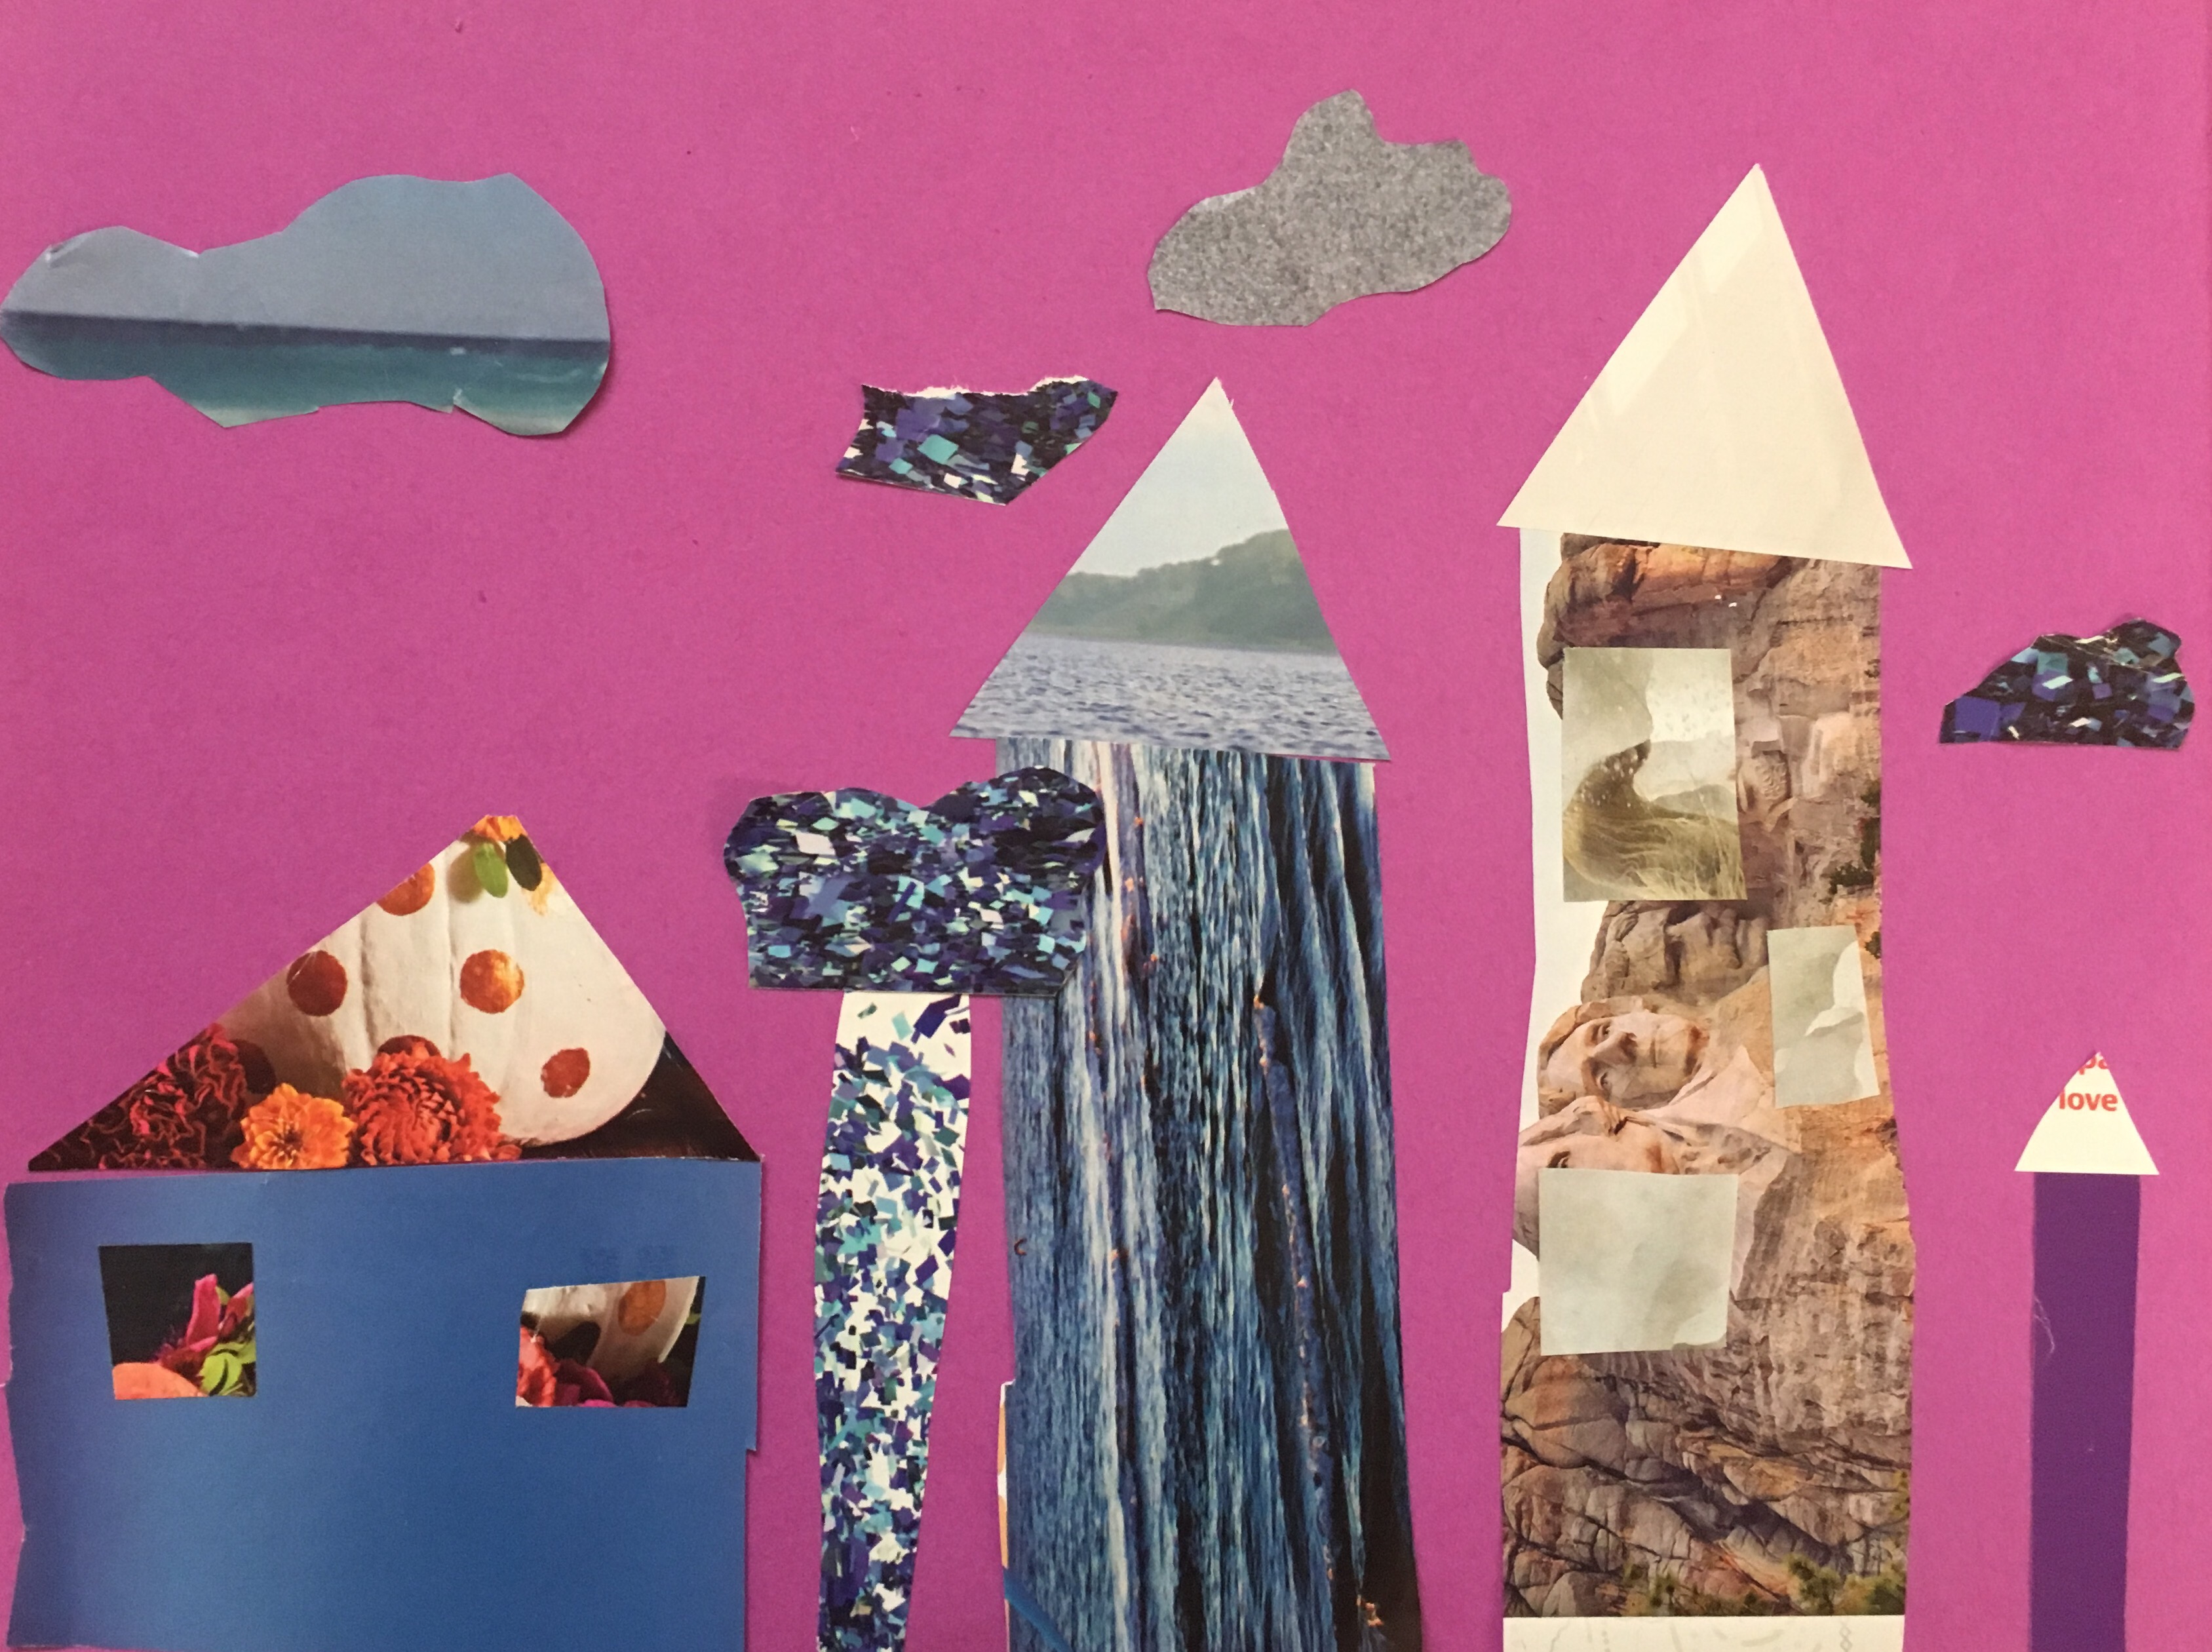 Make a city collage by cutting shapes out of patterned or textured magazine pages.